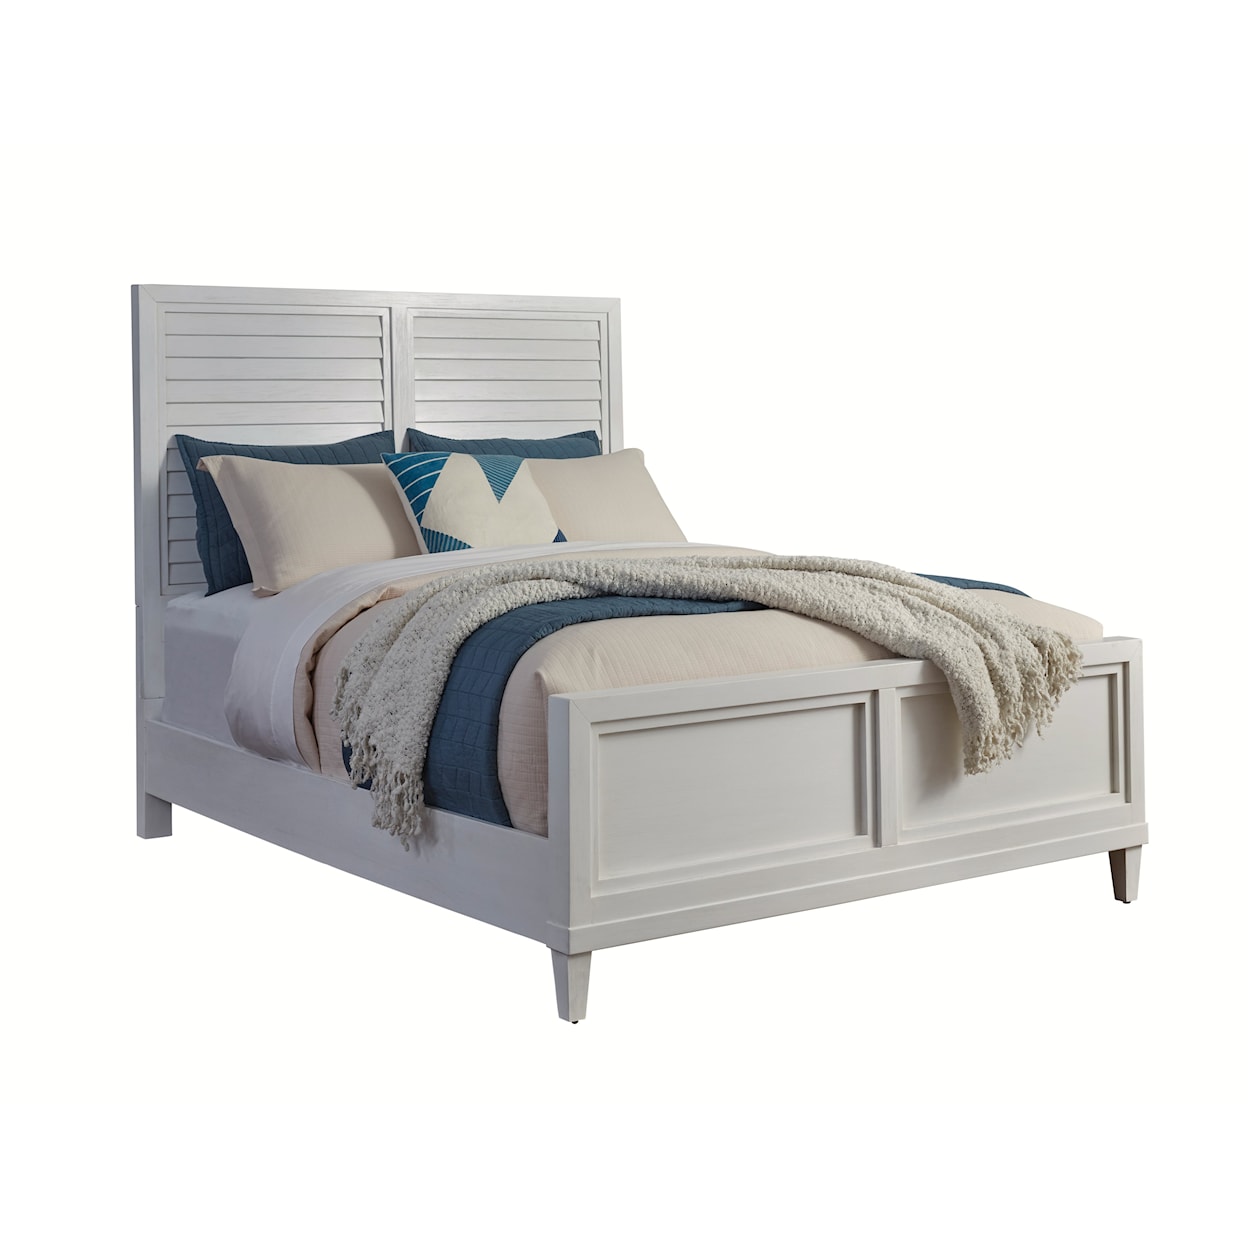 American Woodcrafters Dunescape King Panel Bed